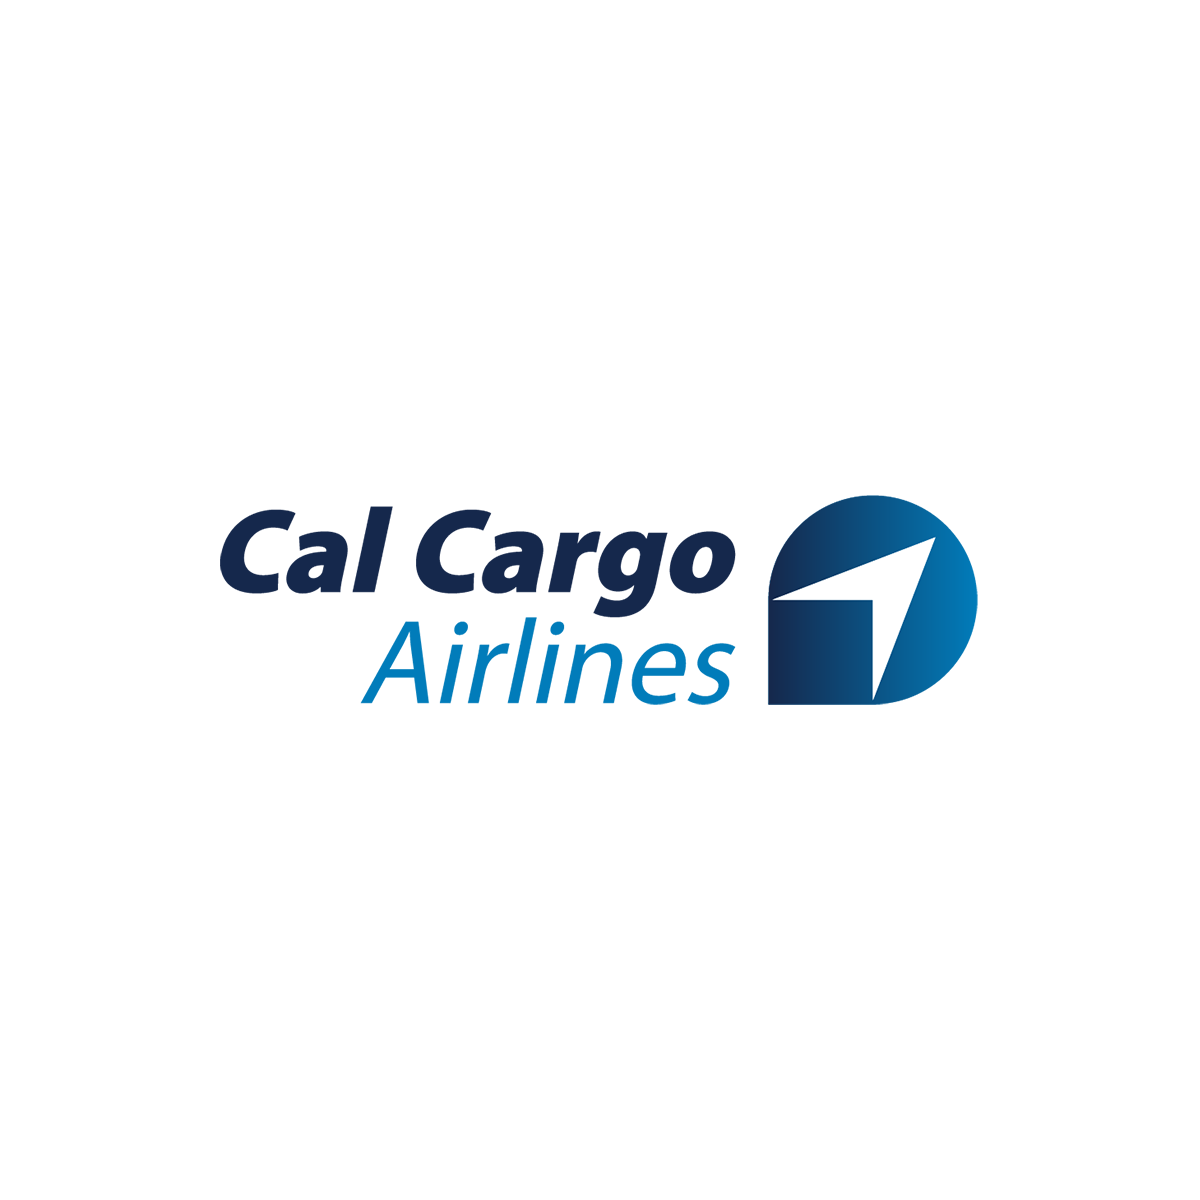 Shipit.to trackers approved for use on Cal Cargo Airlines flights!